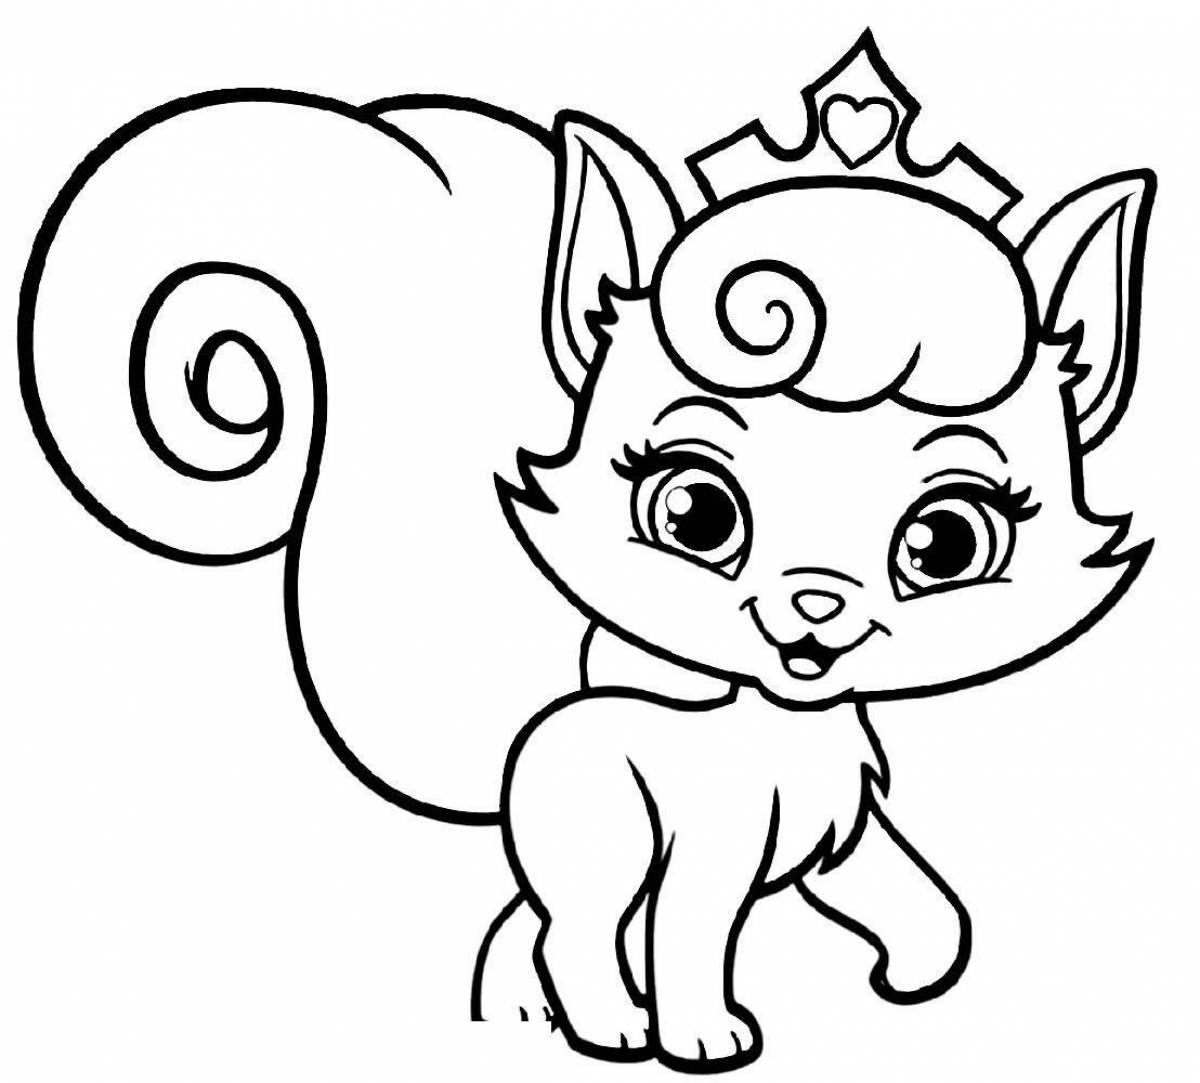 A fascinating kitty coloring book for children 4-5 years old